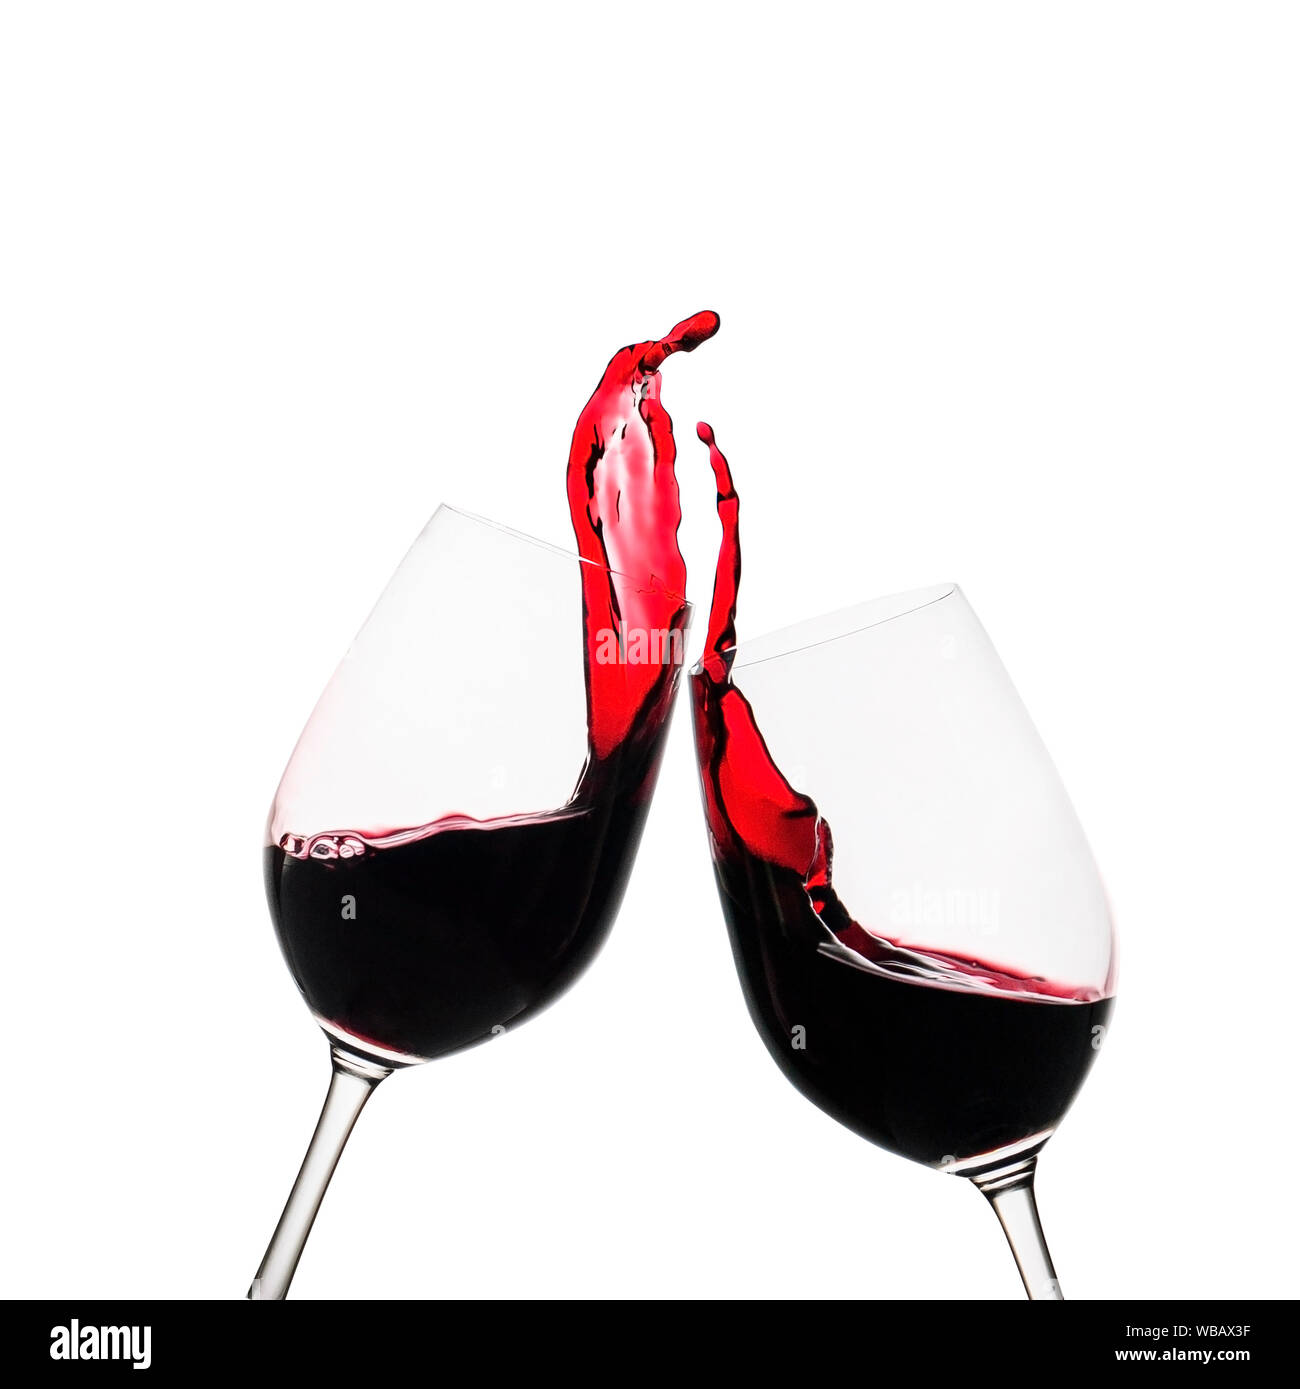 https://c8.alamy.com/comp/WBAX3F/two-clinking-glasses-of-red-wine-in-a-toast-with-freeze-motion-wine-splash-in-each-glass-as-they-tilt-towards-one-another-isolated-on-white-WBAX3F.jpg